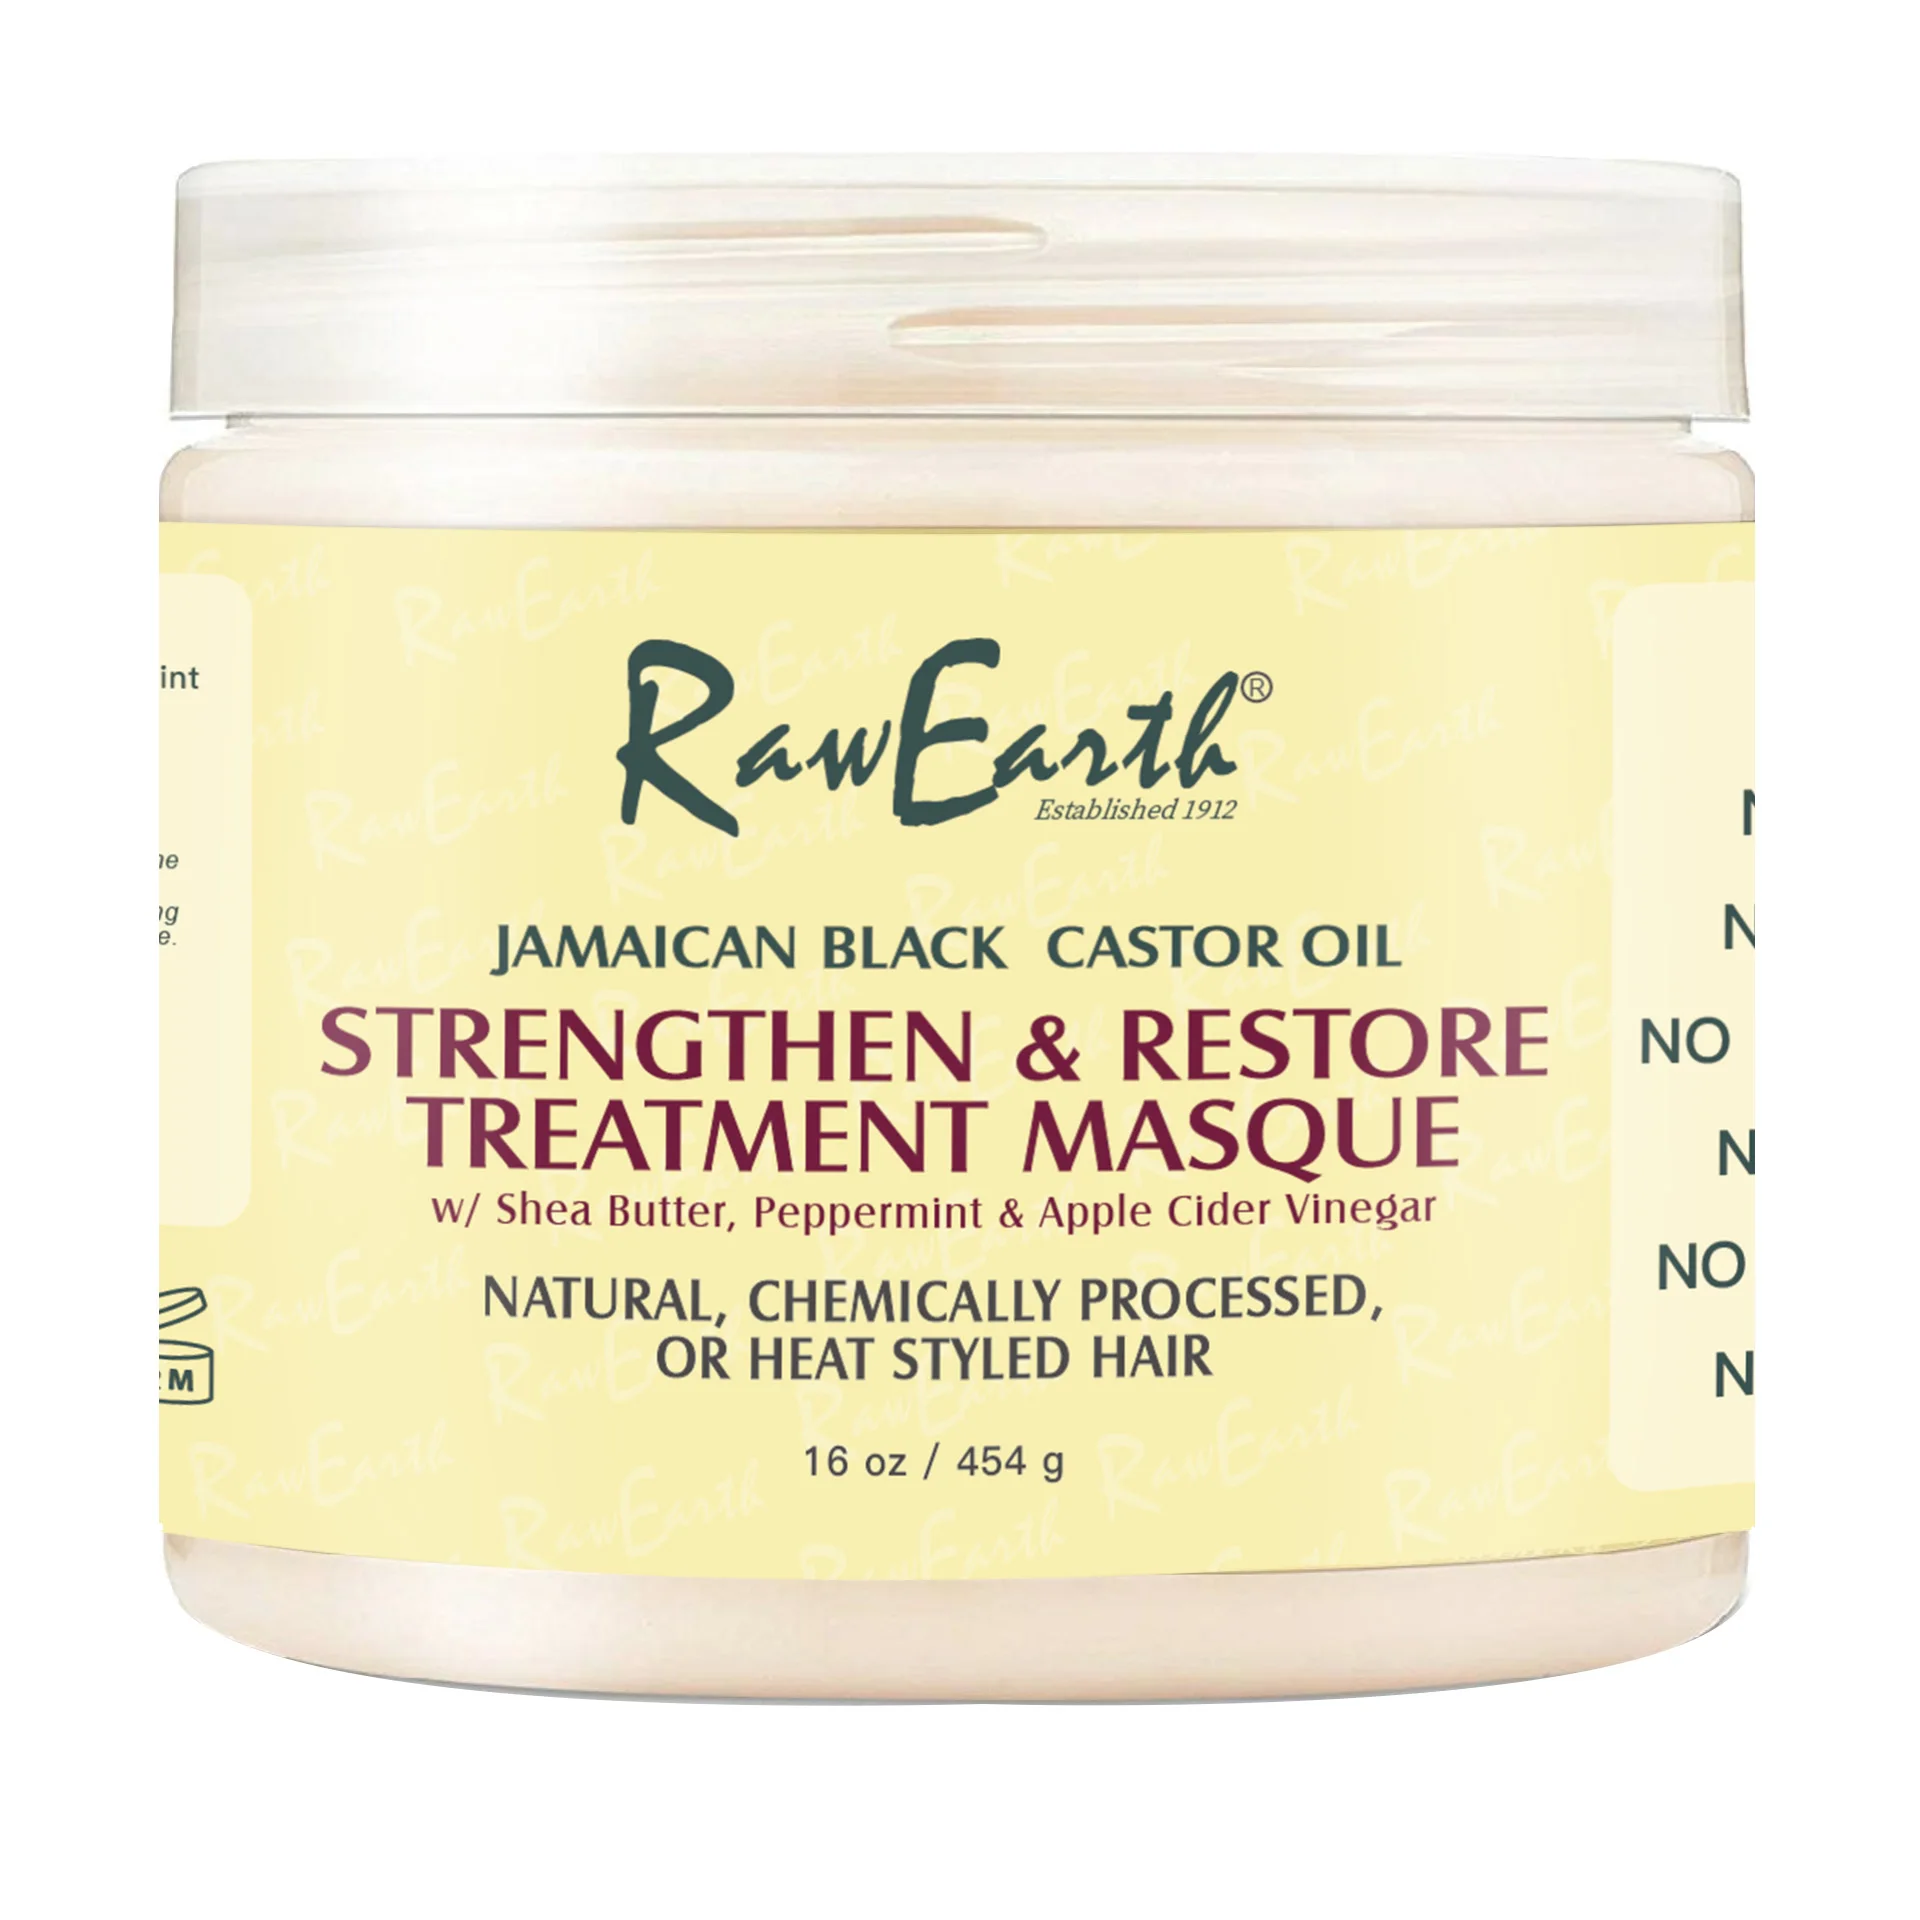 

Raw Earth Jamaican Black Castor Oil Strengthen and Restore for Damaged Dry Hair Treatment Masque